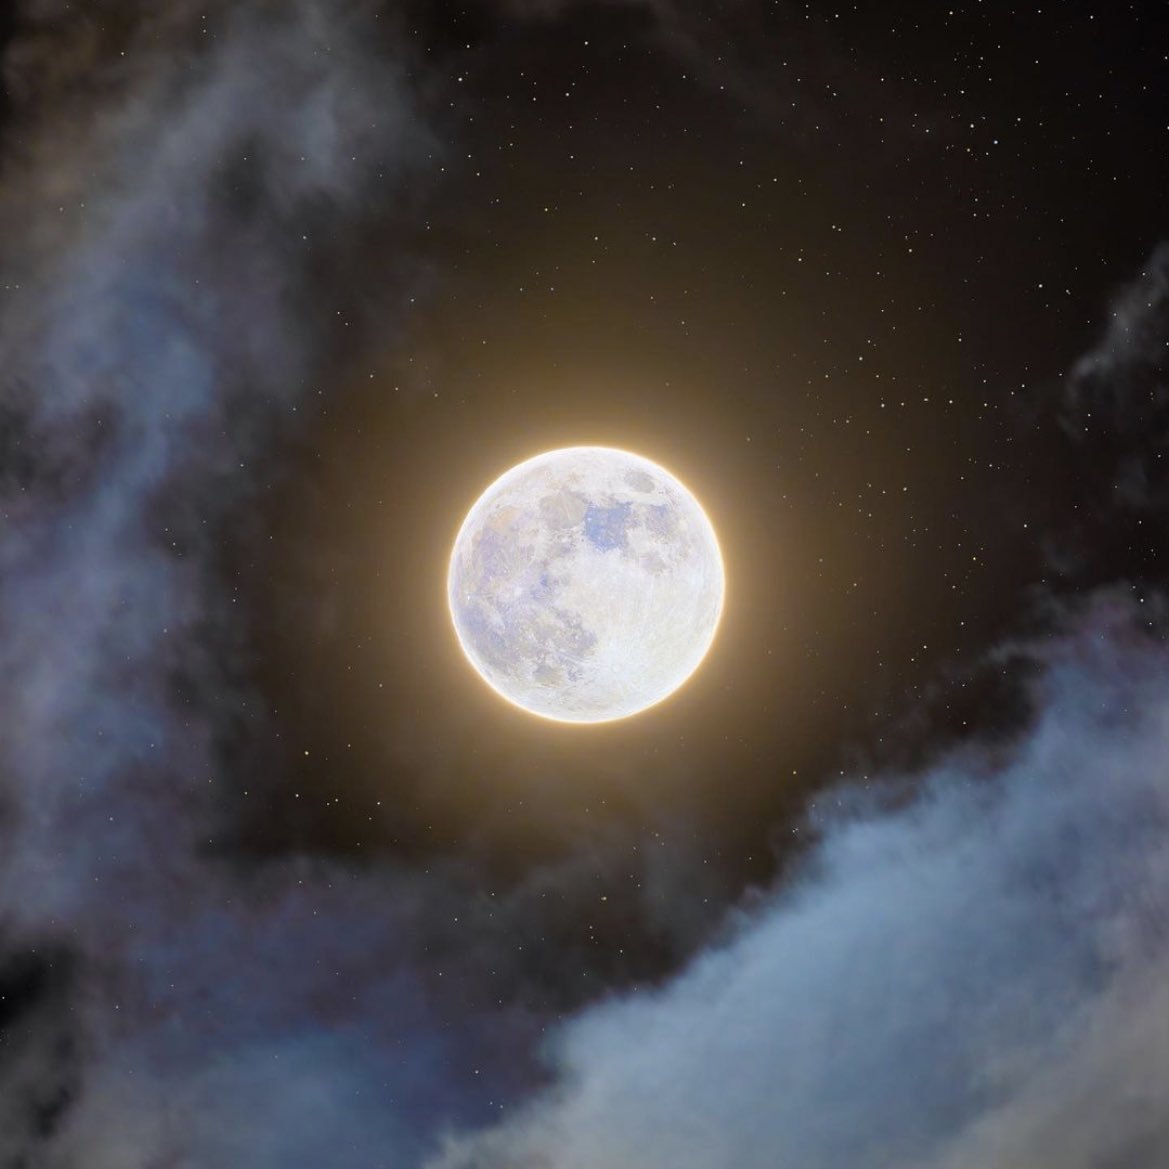 Porn cowboy:the first full moon of 2021, Sophie’s photos